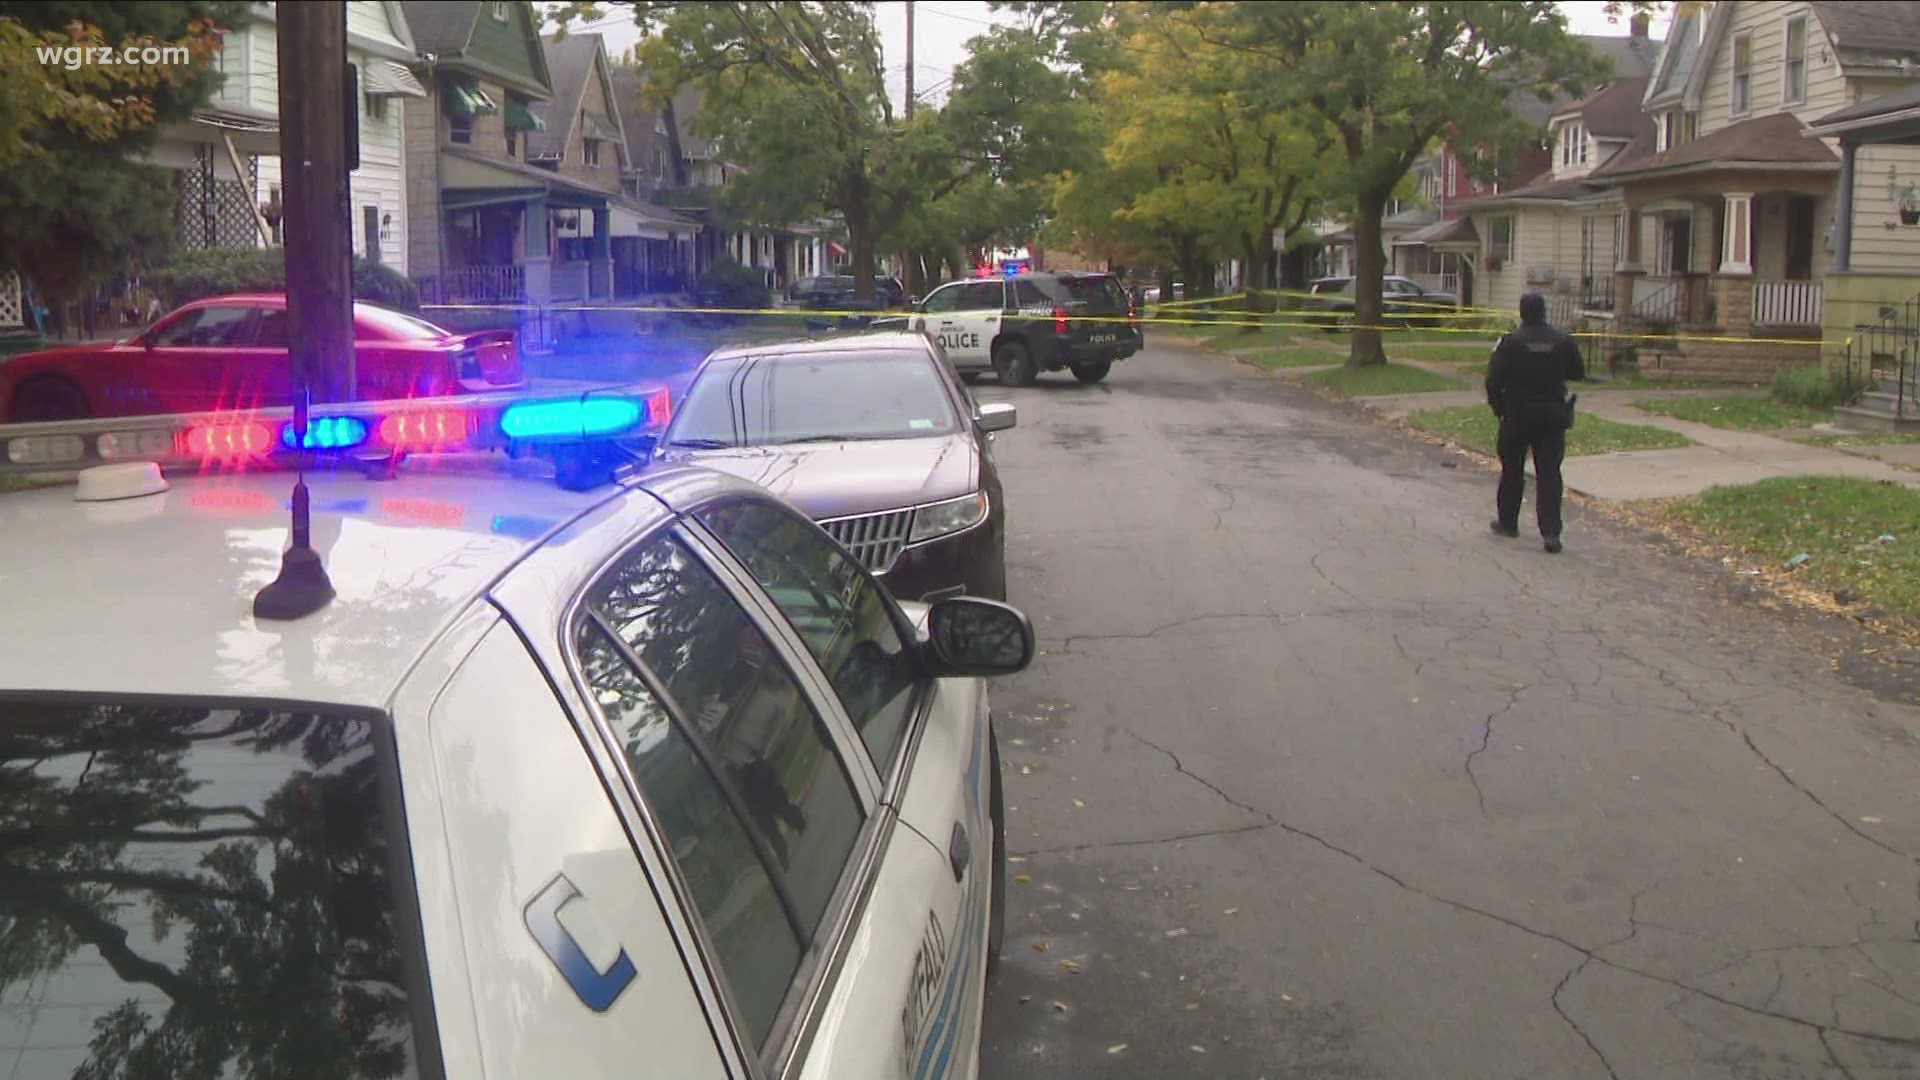 Shooting on Wood Ave in Buffalo